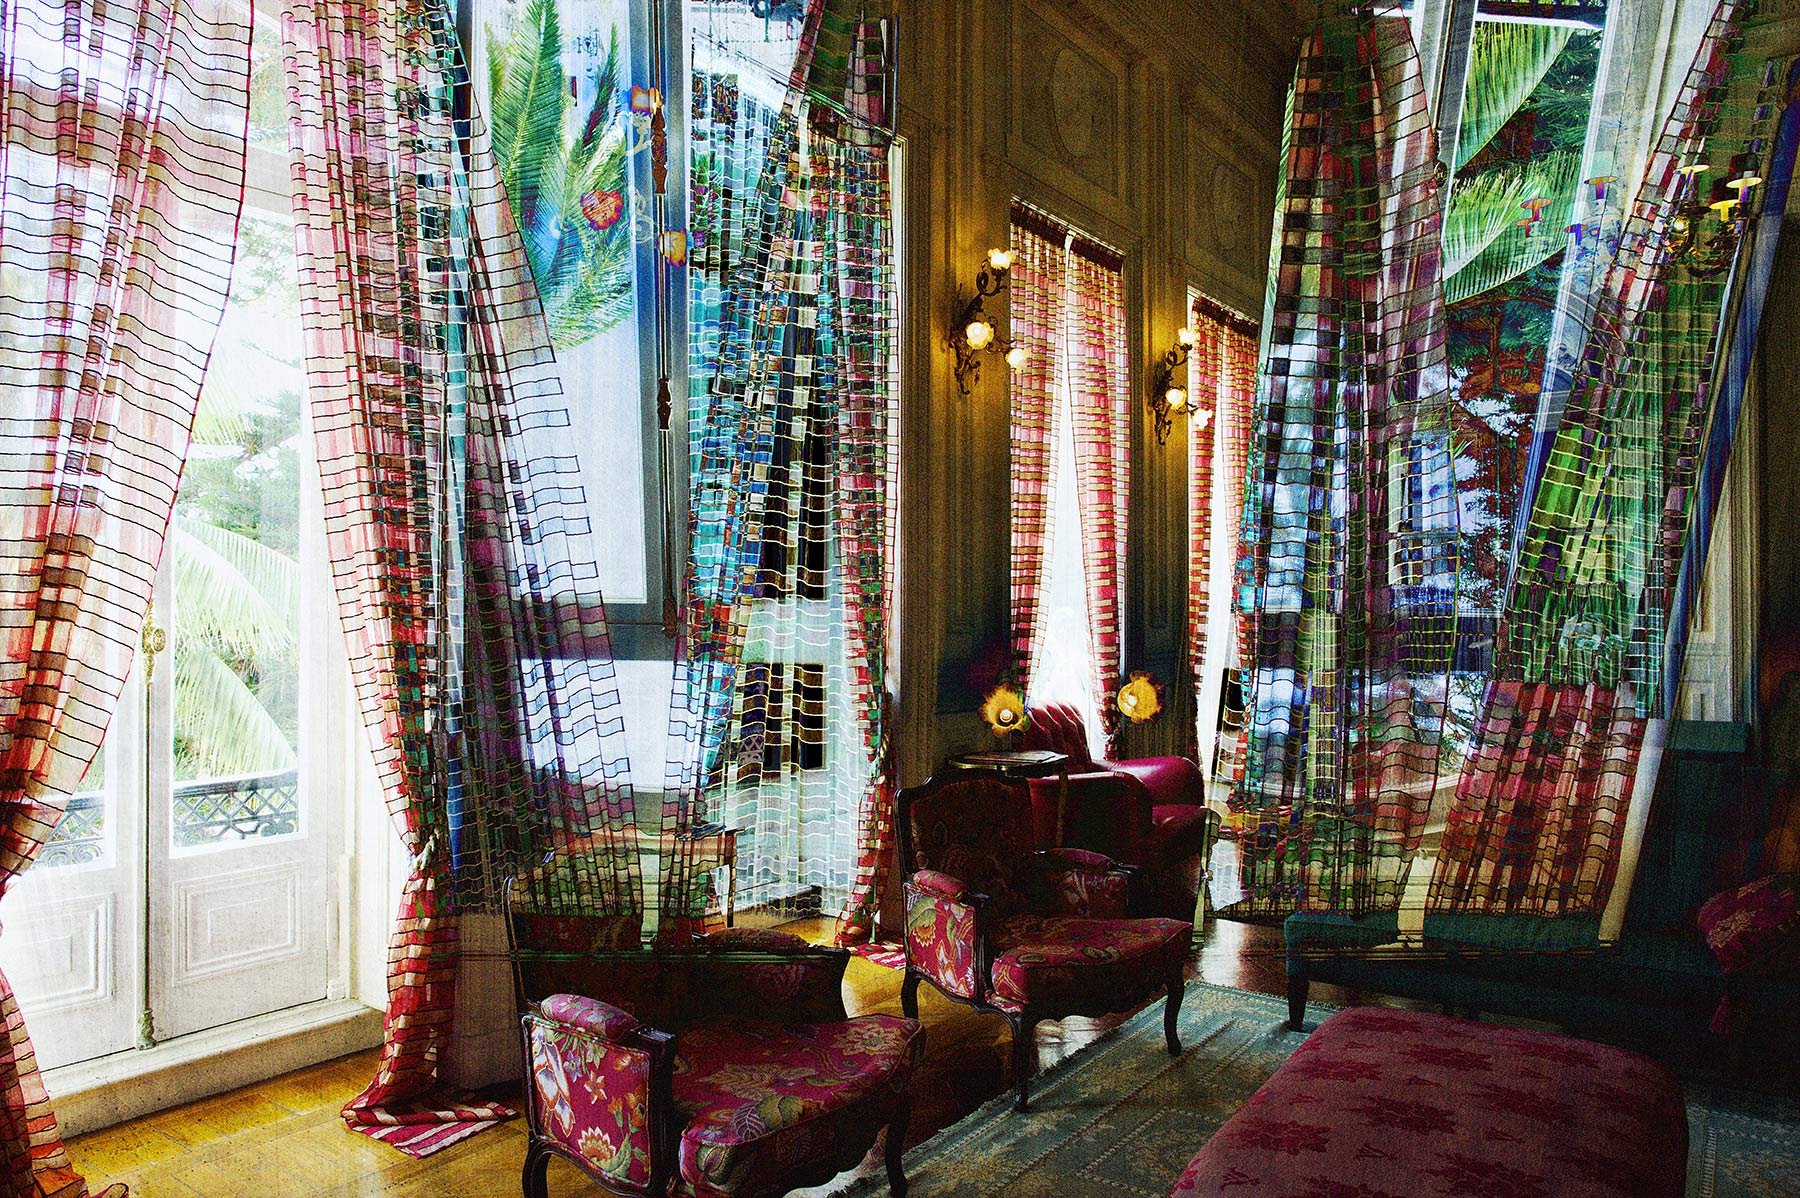 Cacophony of curtains